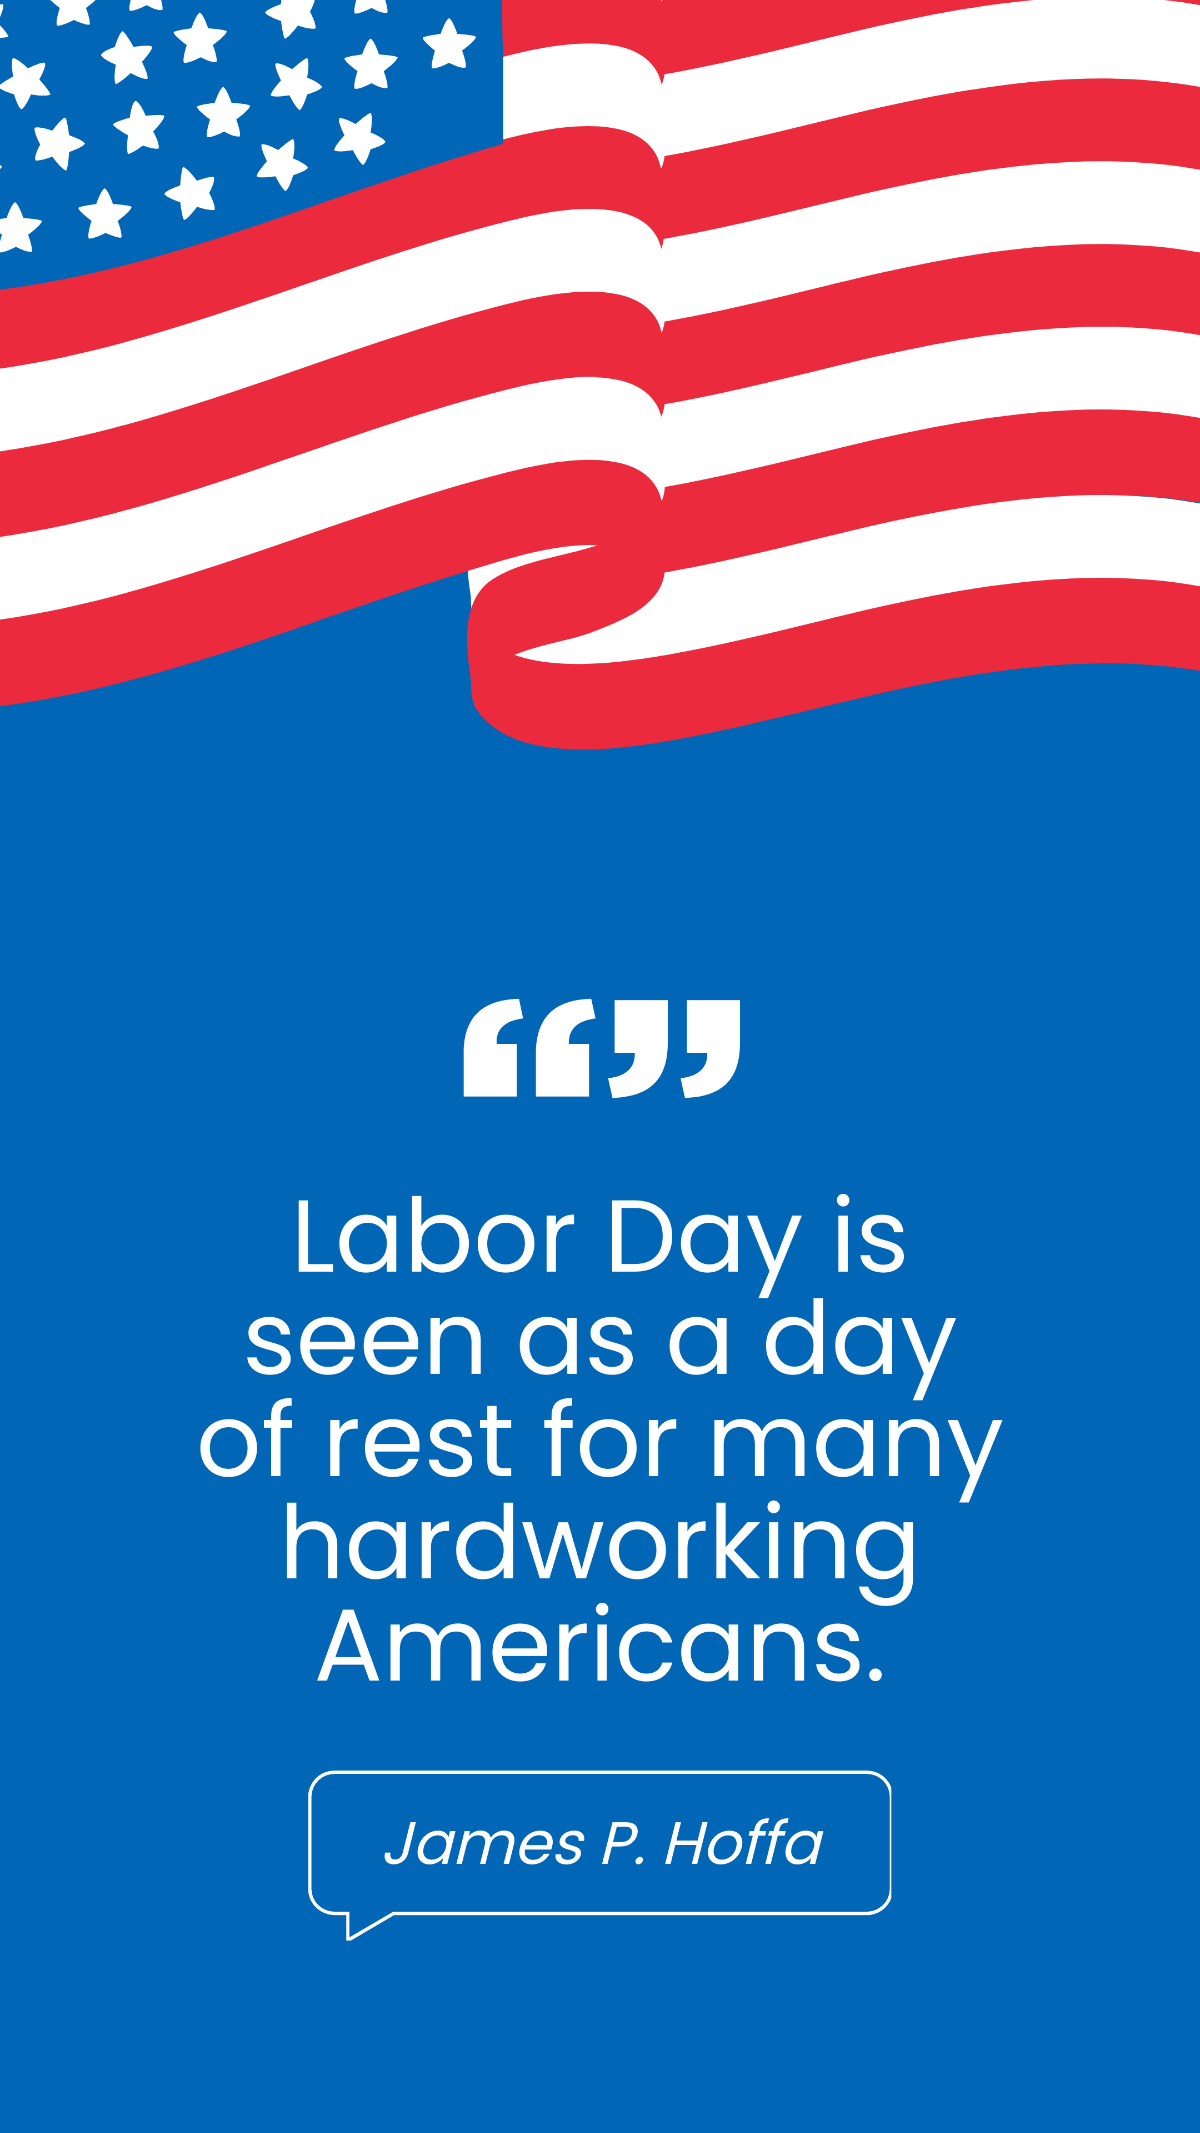 Free James P. Hoffa - Labor Day is seen as a day of rest for many hardworking Americans. Template